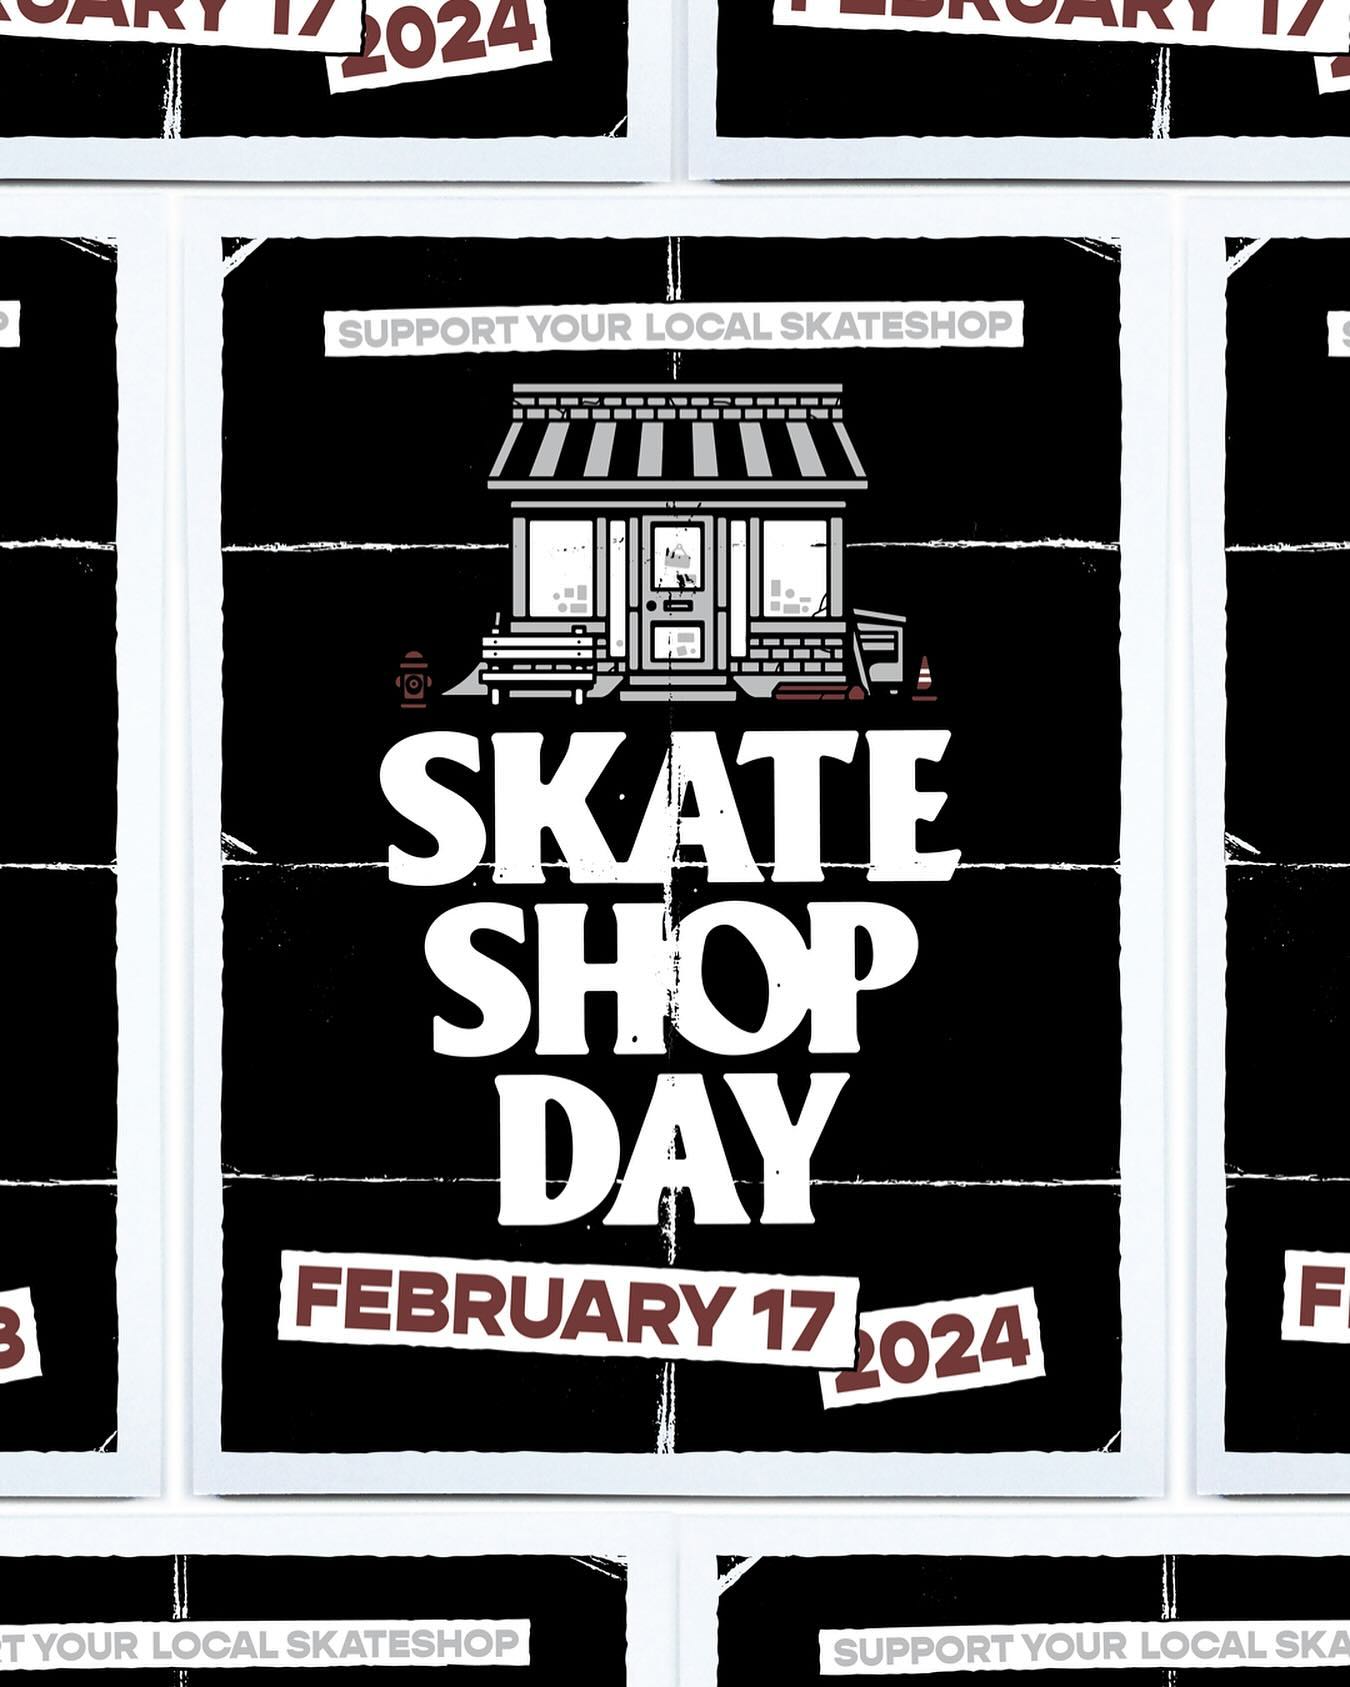 Skate Shop Day 2024 February 17th, Support Your Local Skate Shop - CSC, Cardiff Skateboard Club - UK Skate Shop